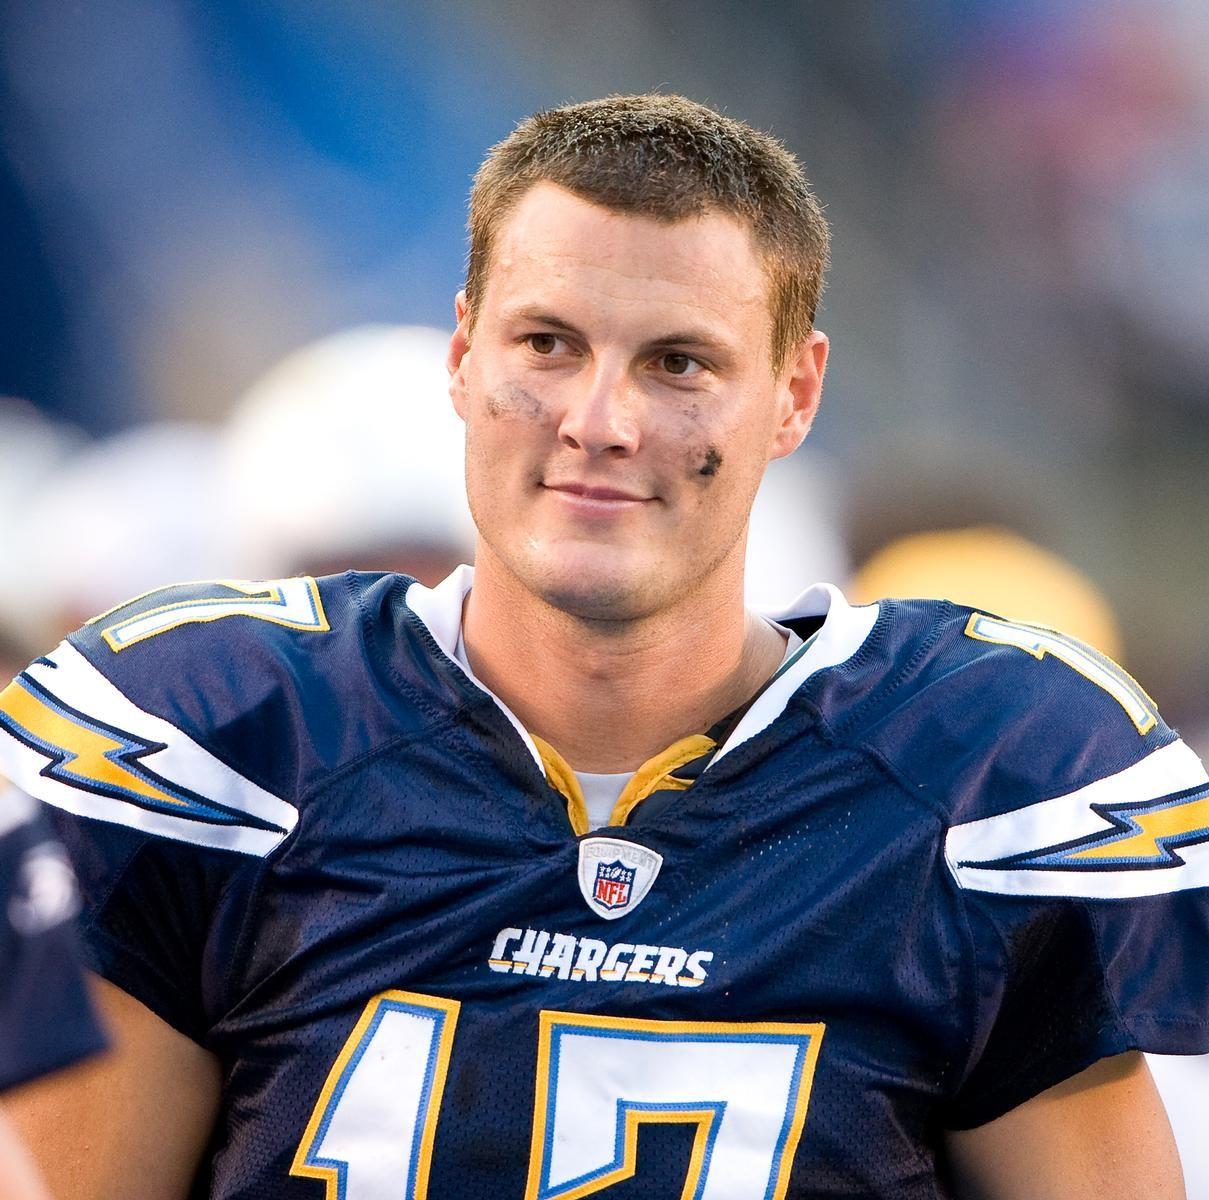 San Diego Chargers Quarterback Philip Rivers to Address 2014